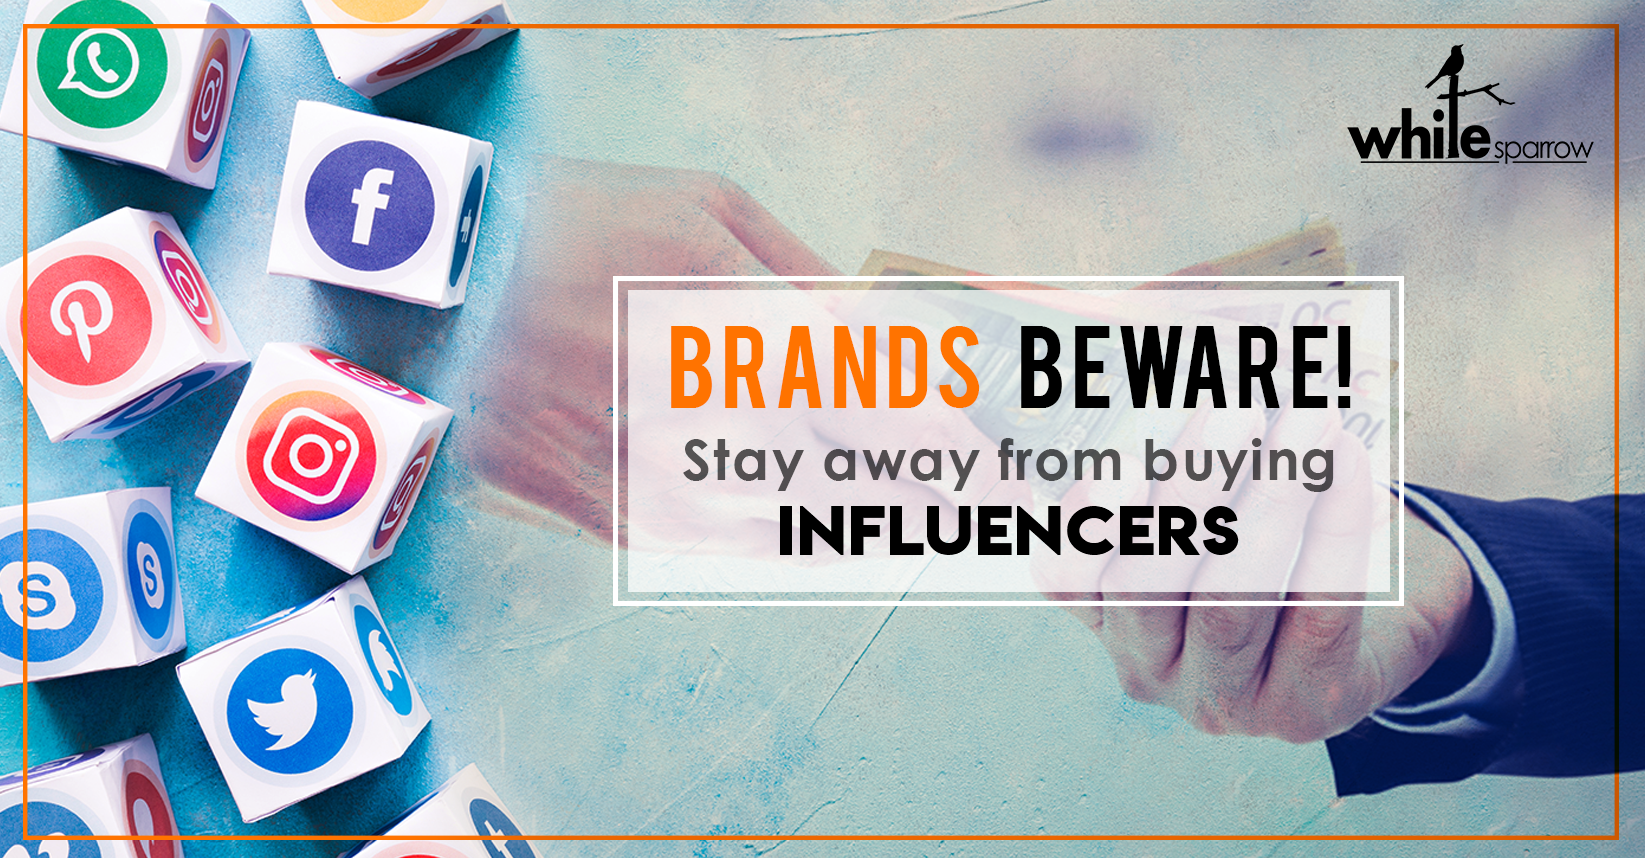 Brands beware! Stay away from buying influencers